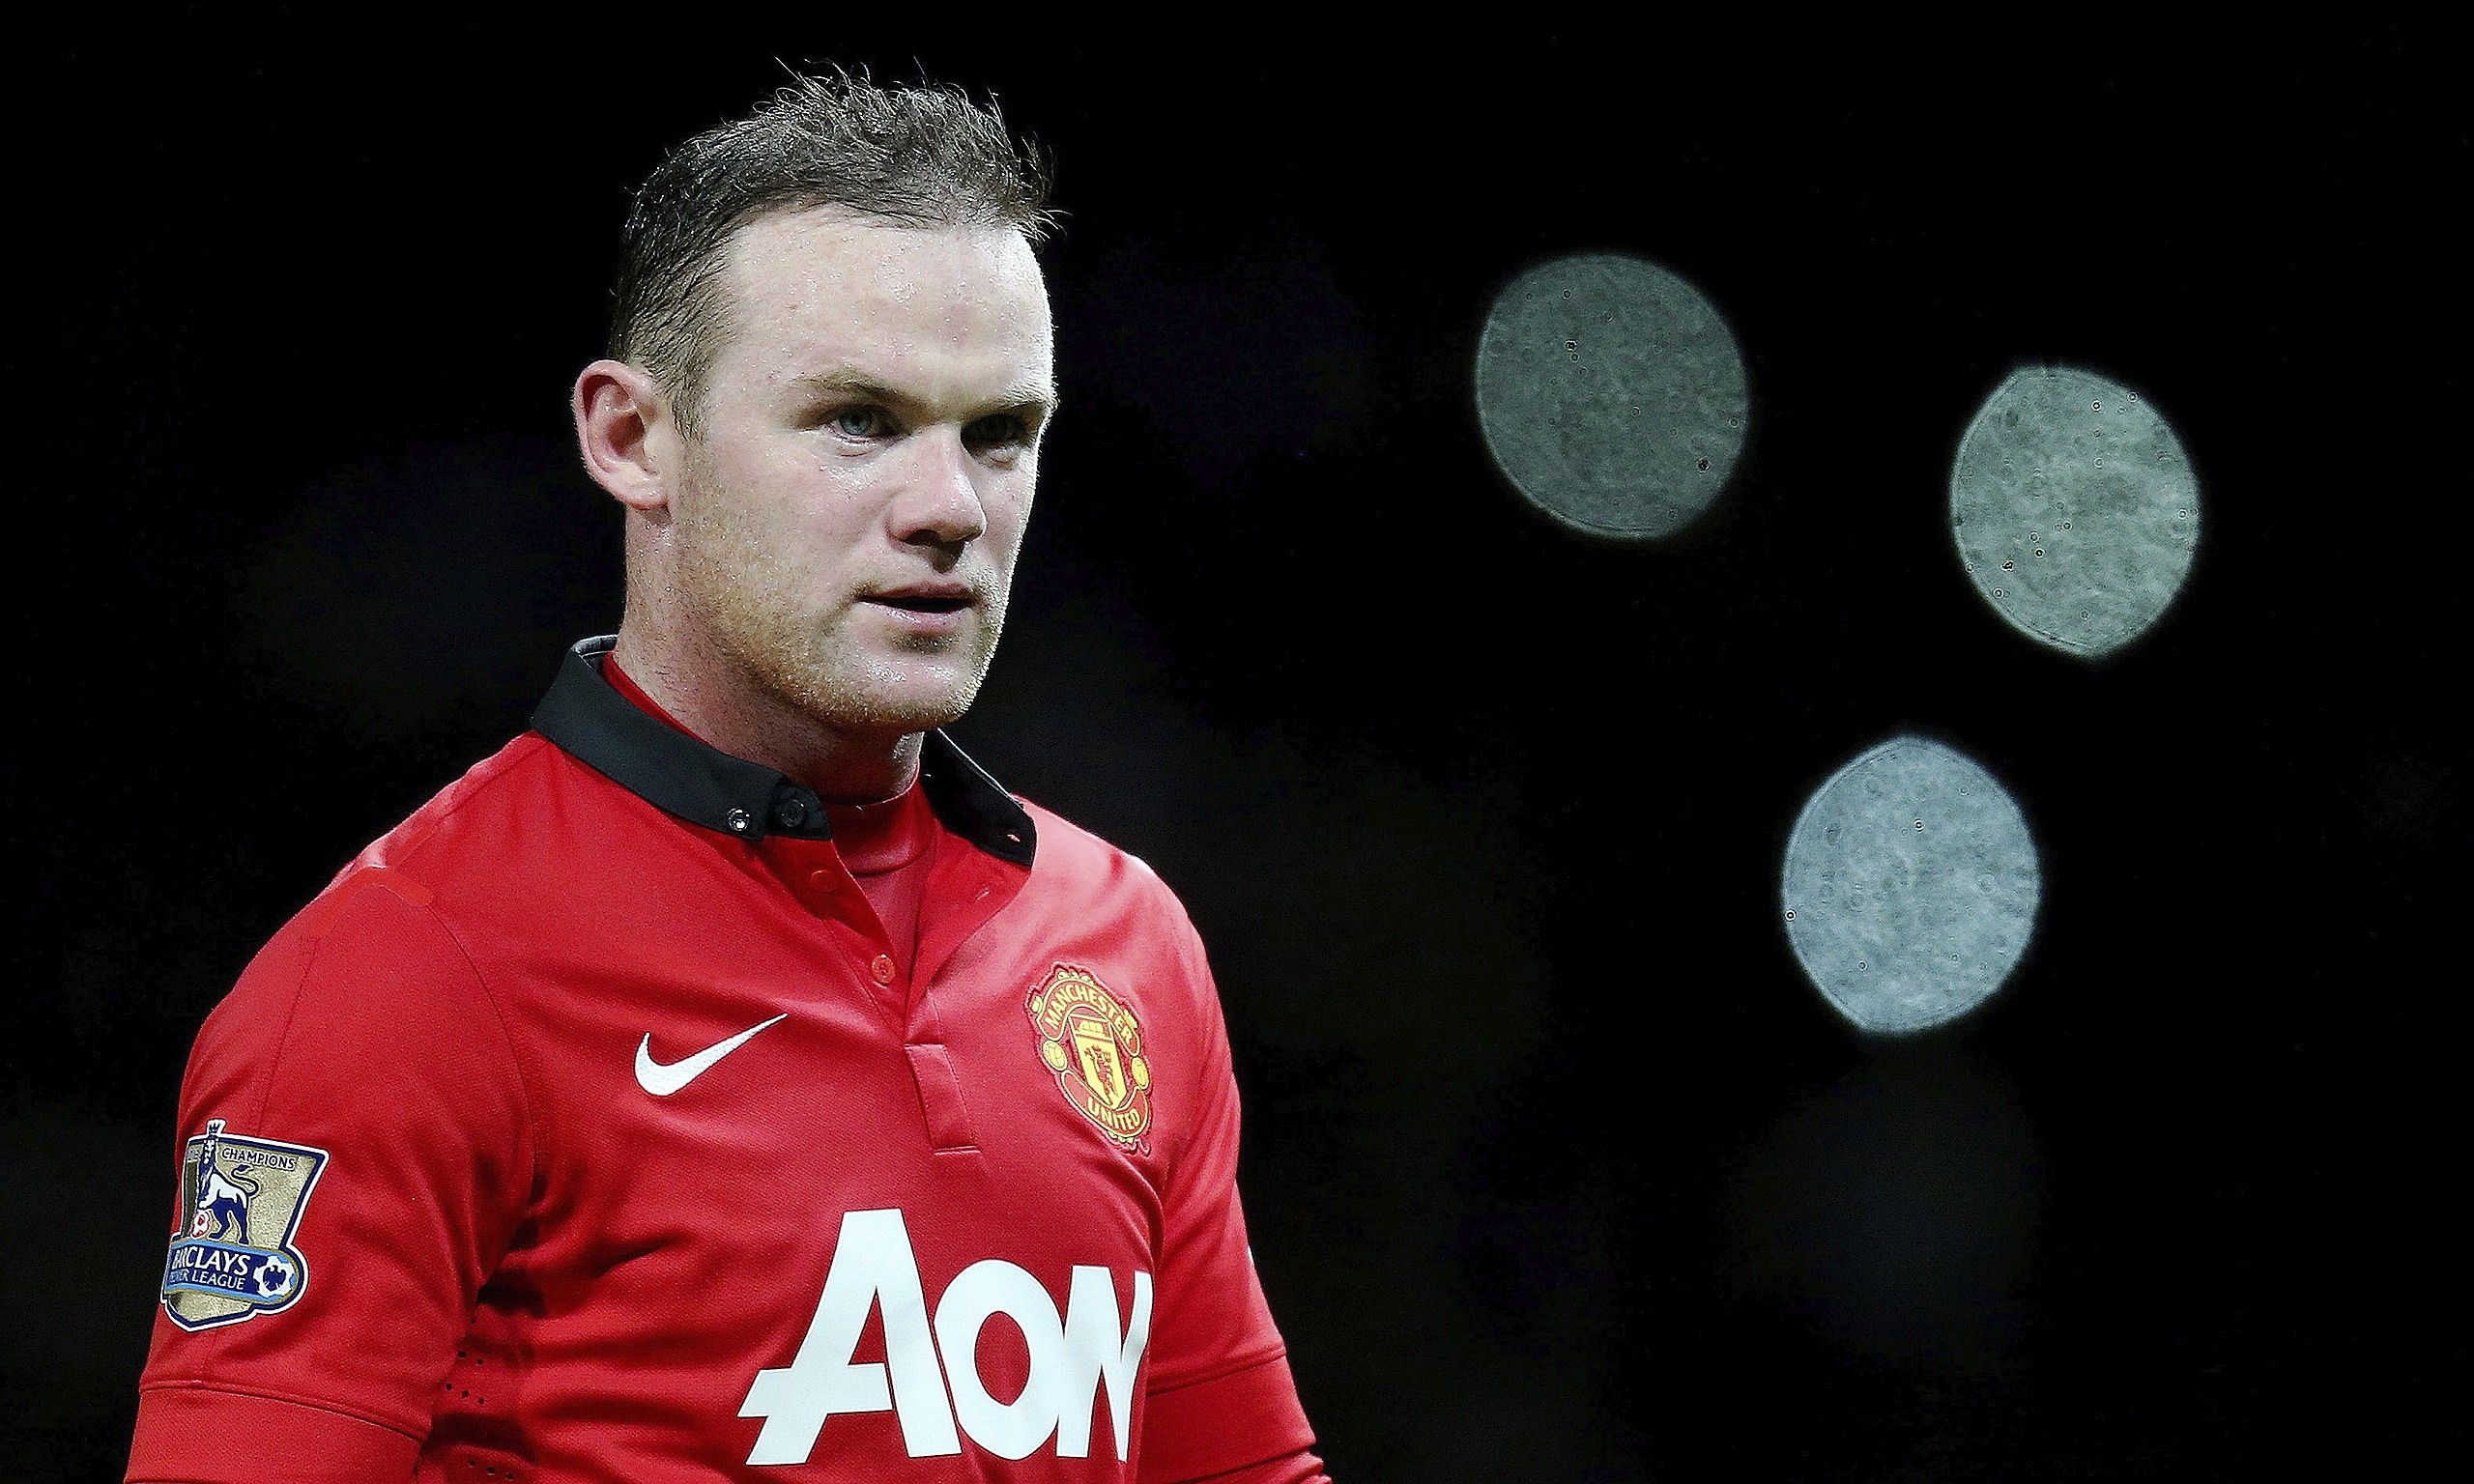 2560x1536 Wayne Rooney HD Images : Get Free top quality Wayne Rooney HD Images for  your desktop